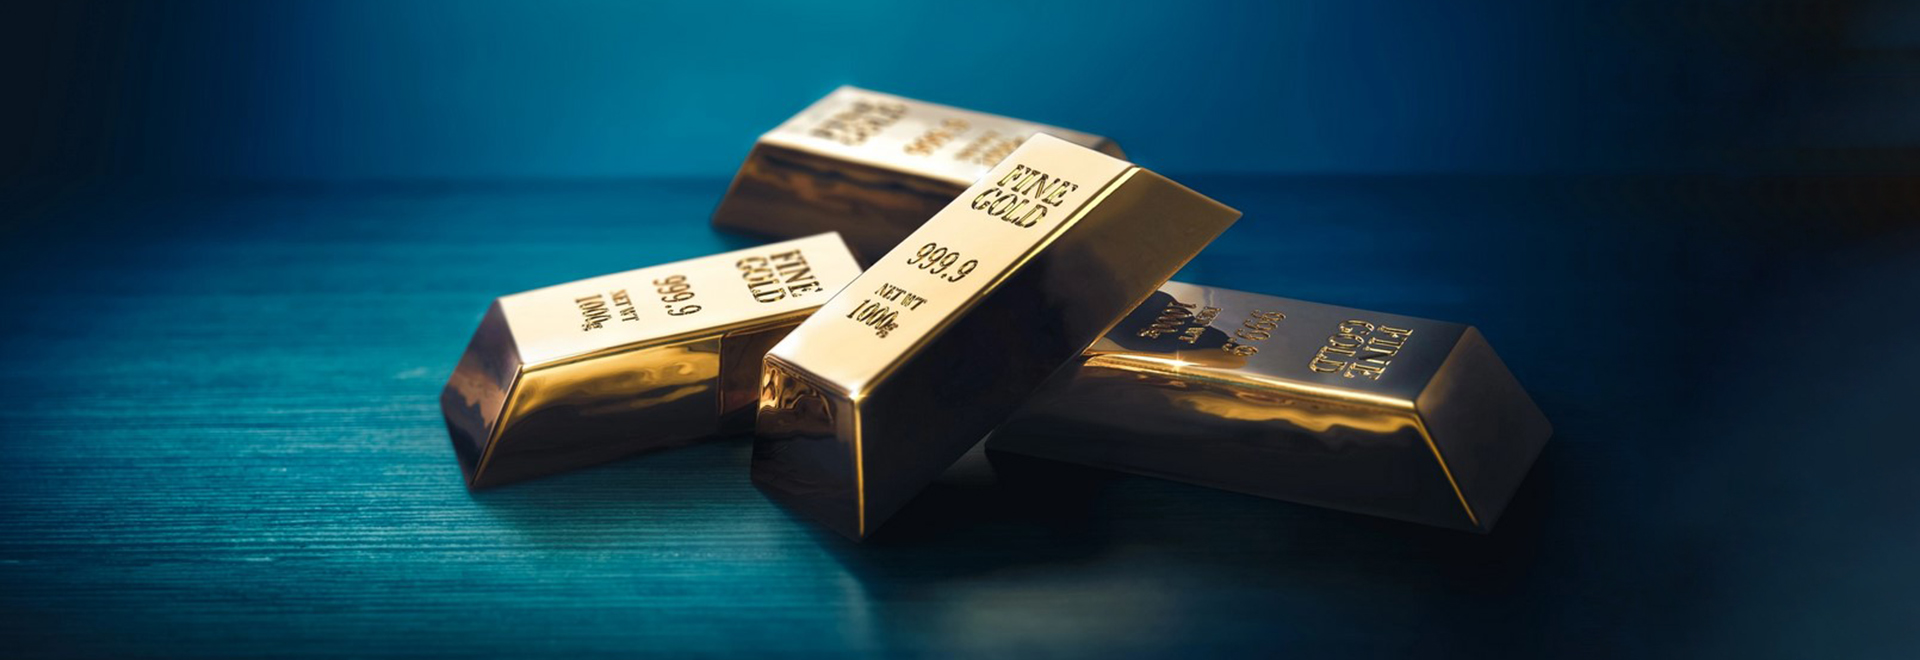 Gold Prices Are Witnessing A Downward Trend